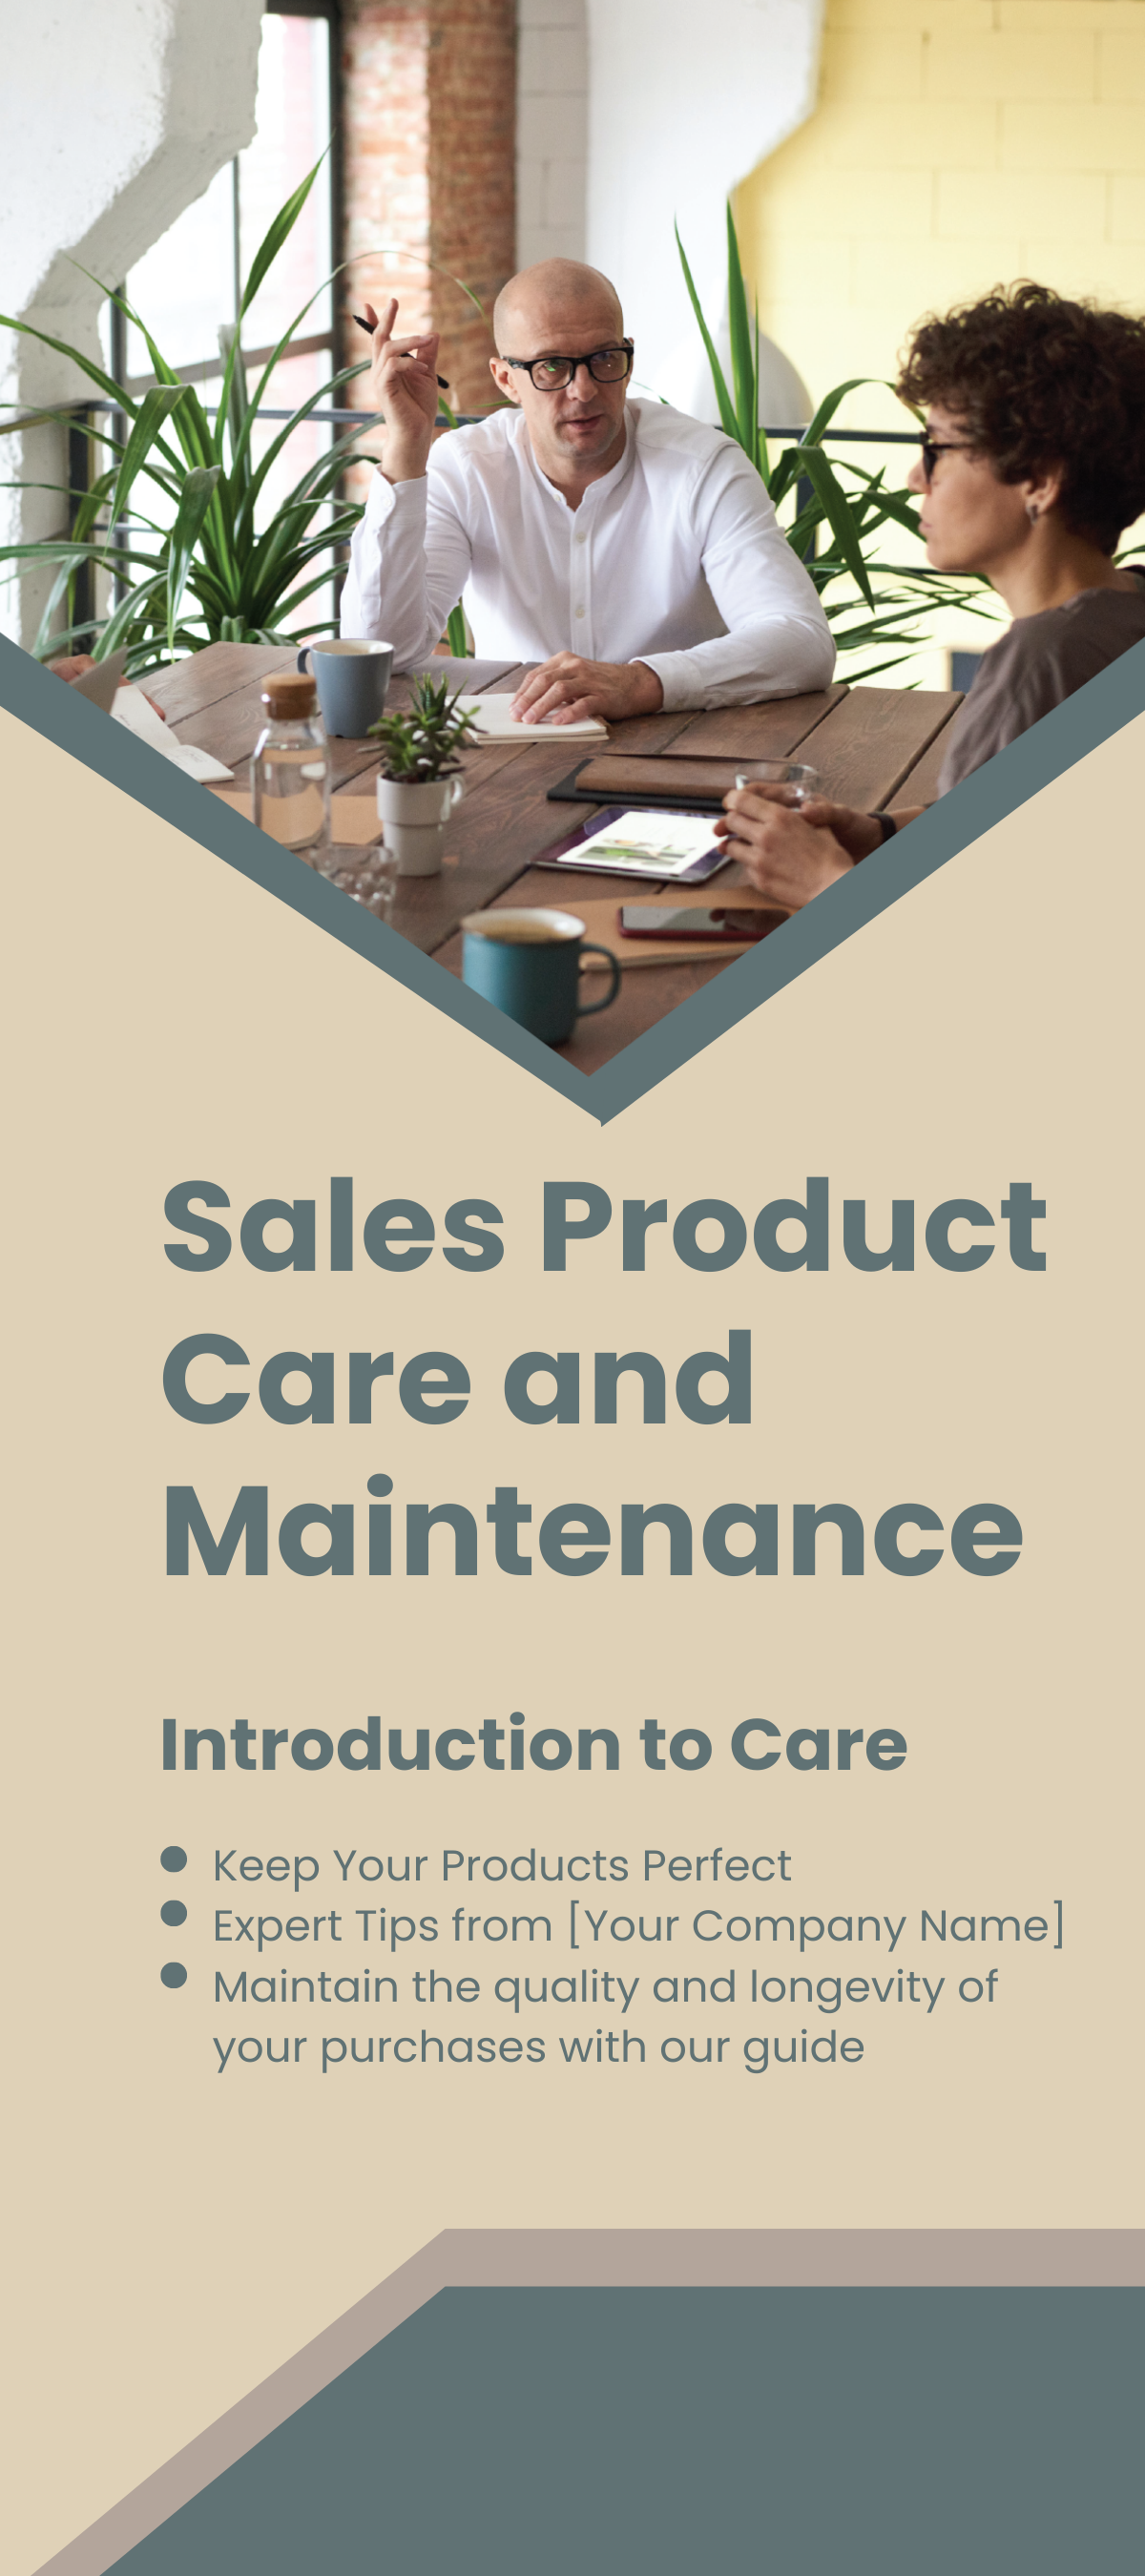 Sales Product Care and Maintenance Rack Card Template